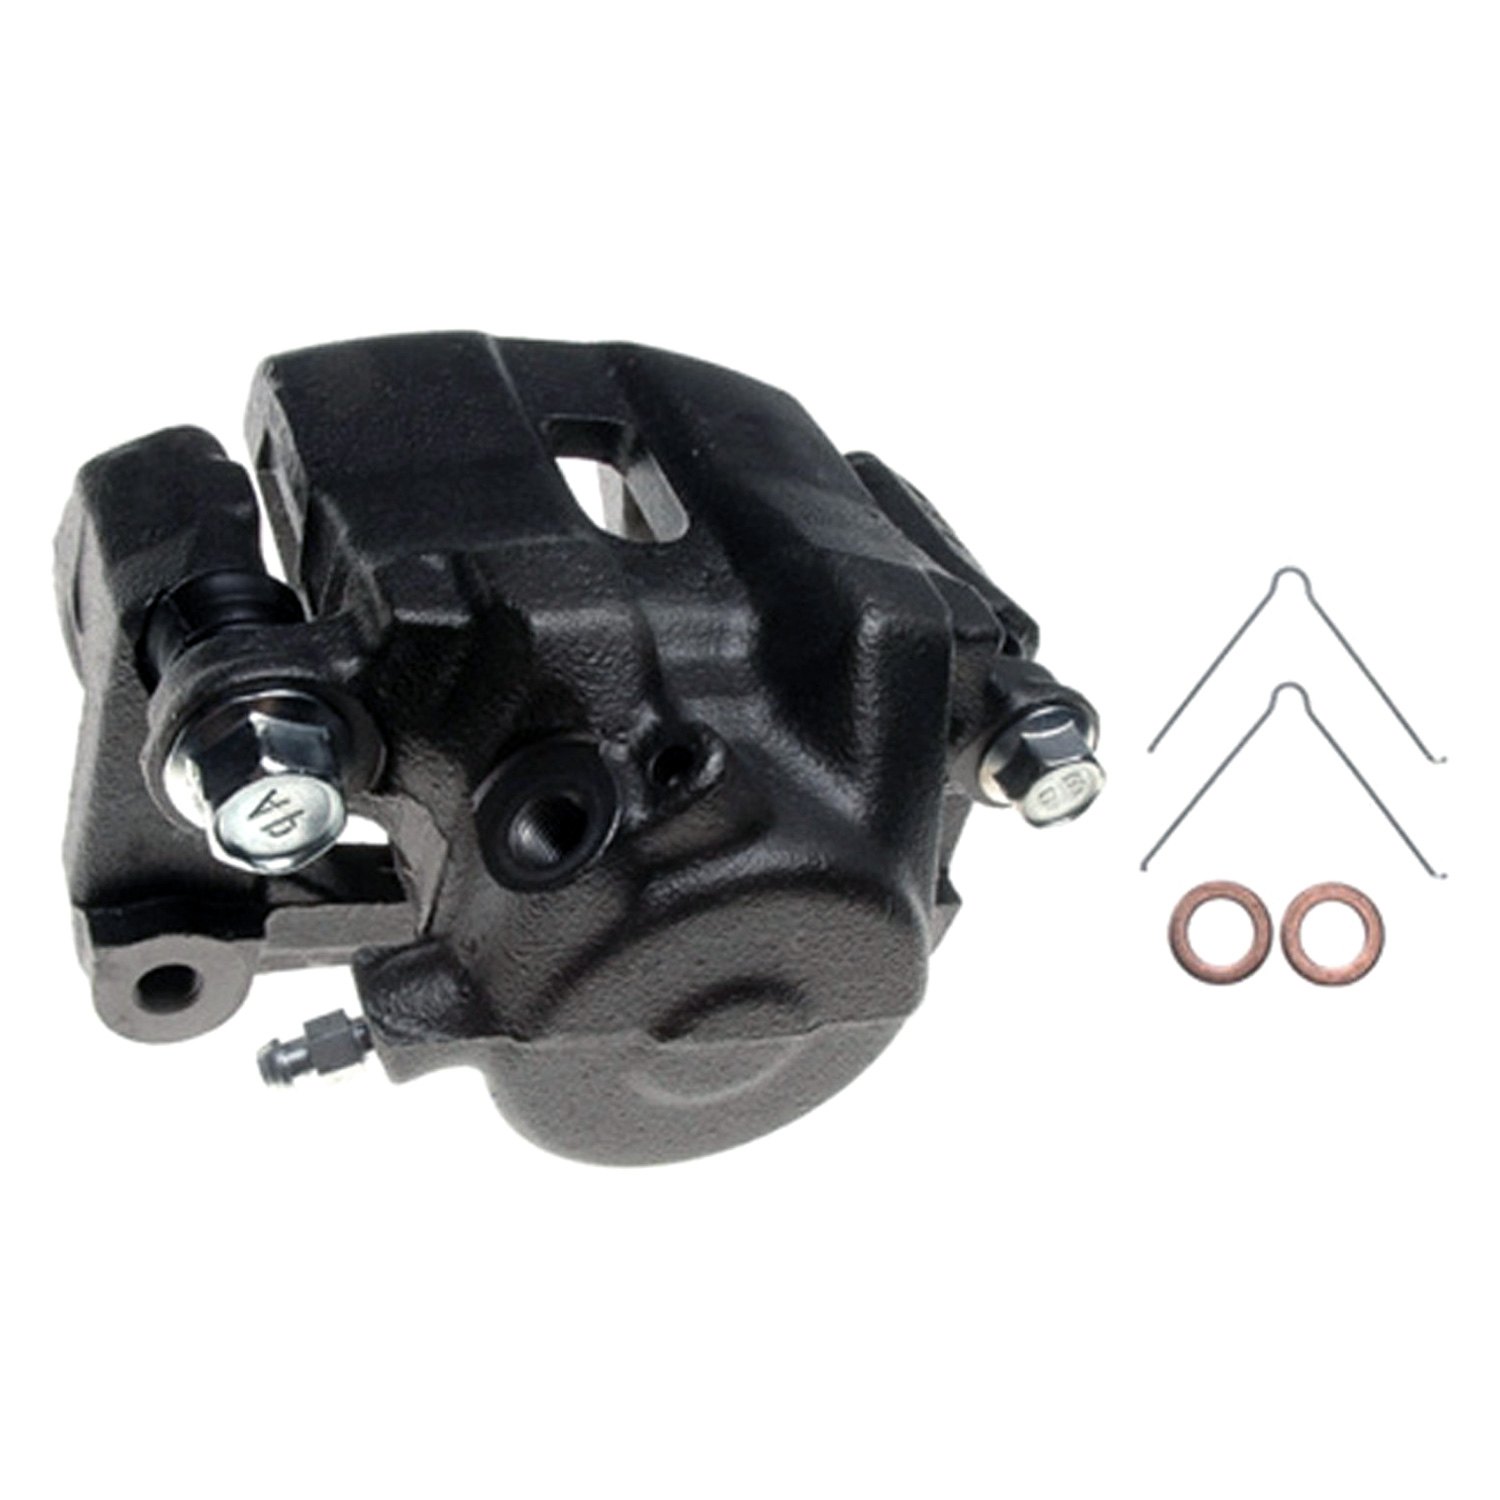 Remanufactured ACDelco 18FR11955 Professional Front Disc Brake Caliper Assembly without Pads Friction Ready Non-Coated